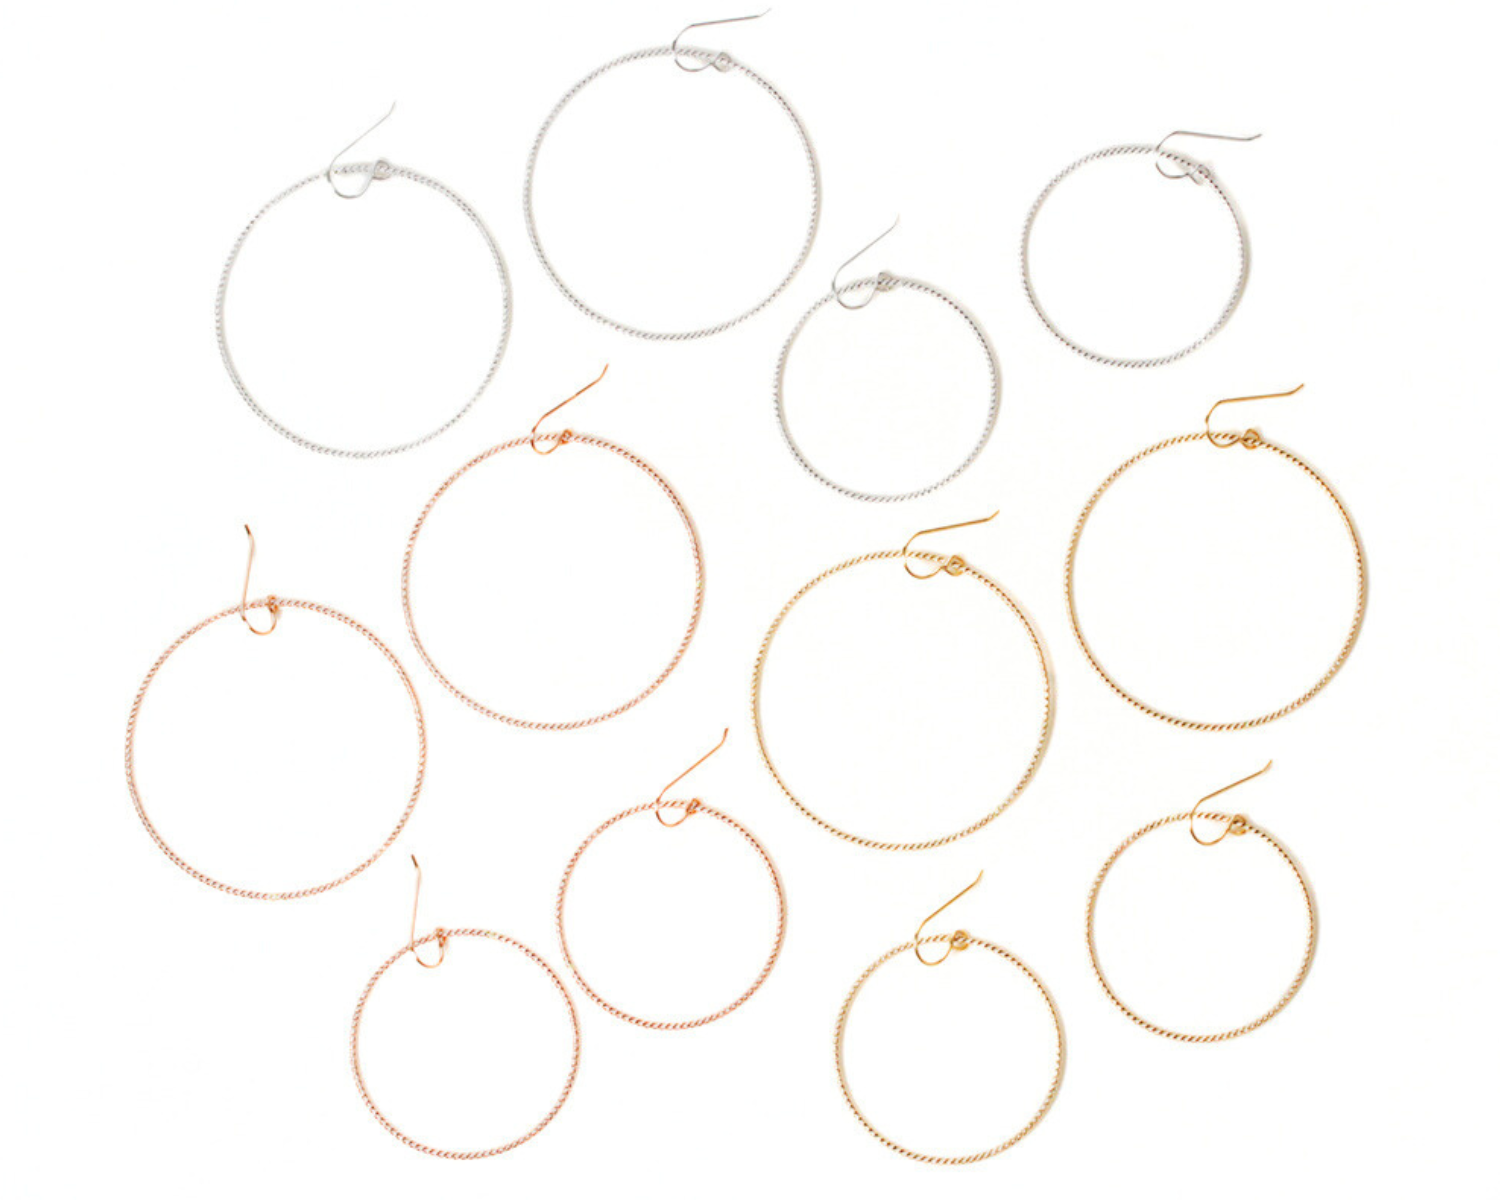 Two sizes and three fine metal options make it easy to find your perfect pair. Select Small, with circles measuring 1.5 inch across, or Large, measuring 2 inches across. Select .925 Sterling Silver, 14 karat Yellow Gold Filled or Rose Gold Filled.